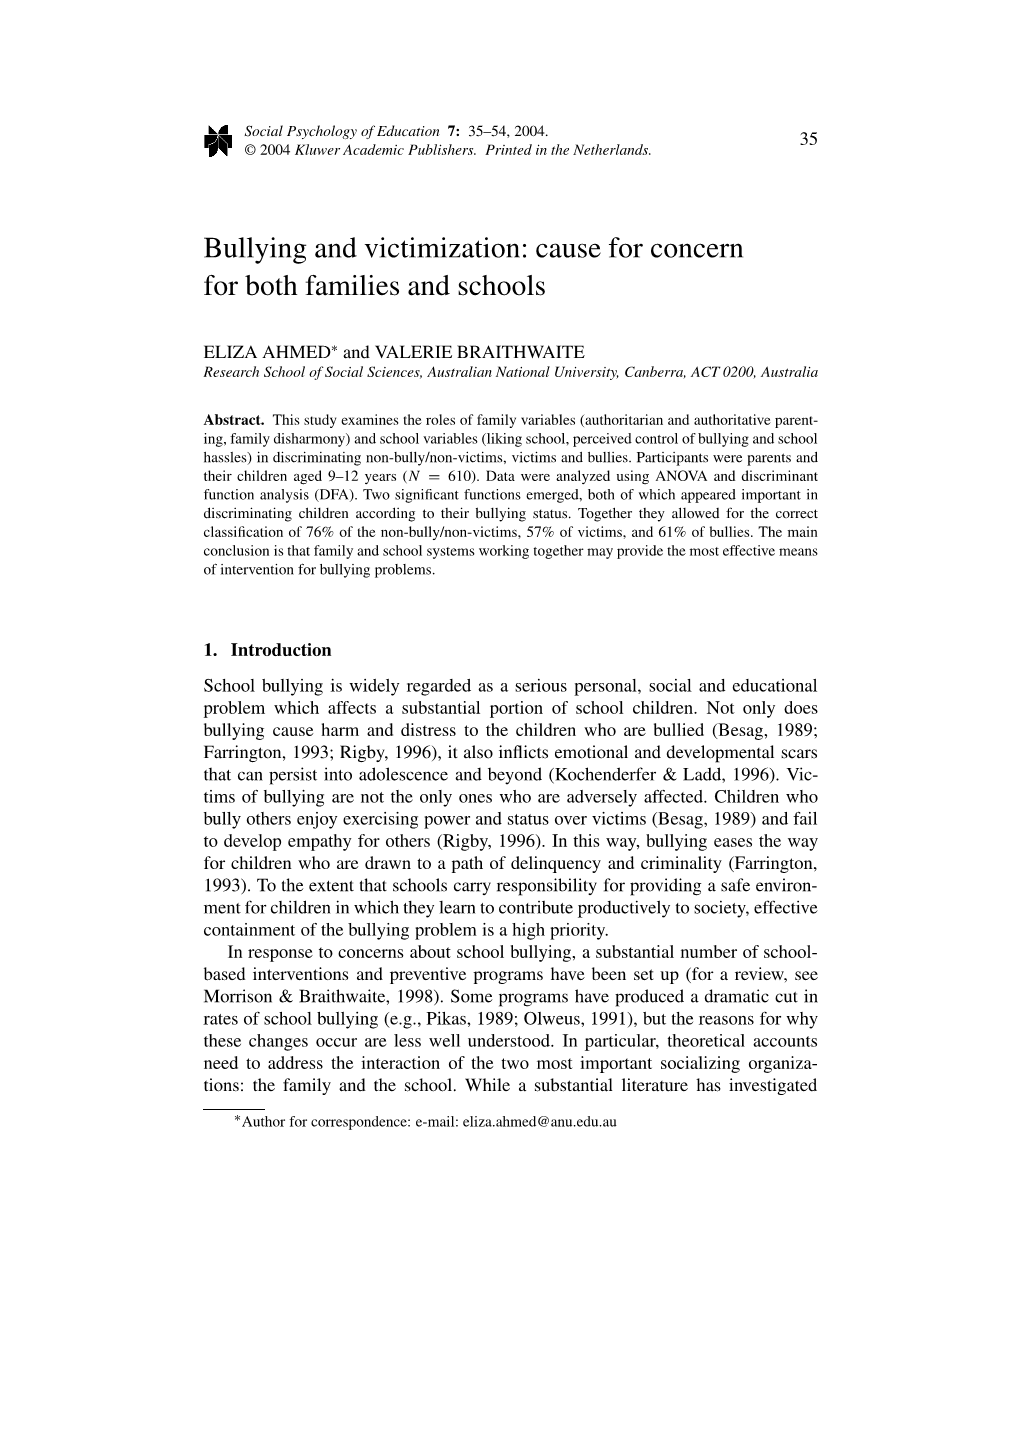 Bullying and Victimization: Cause for Concern for Both Families and Schools